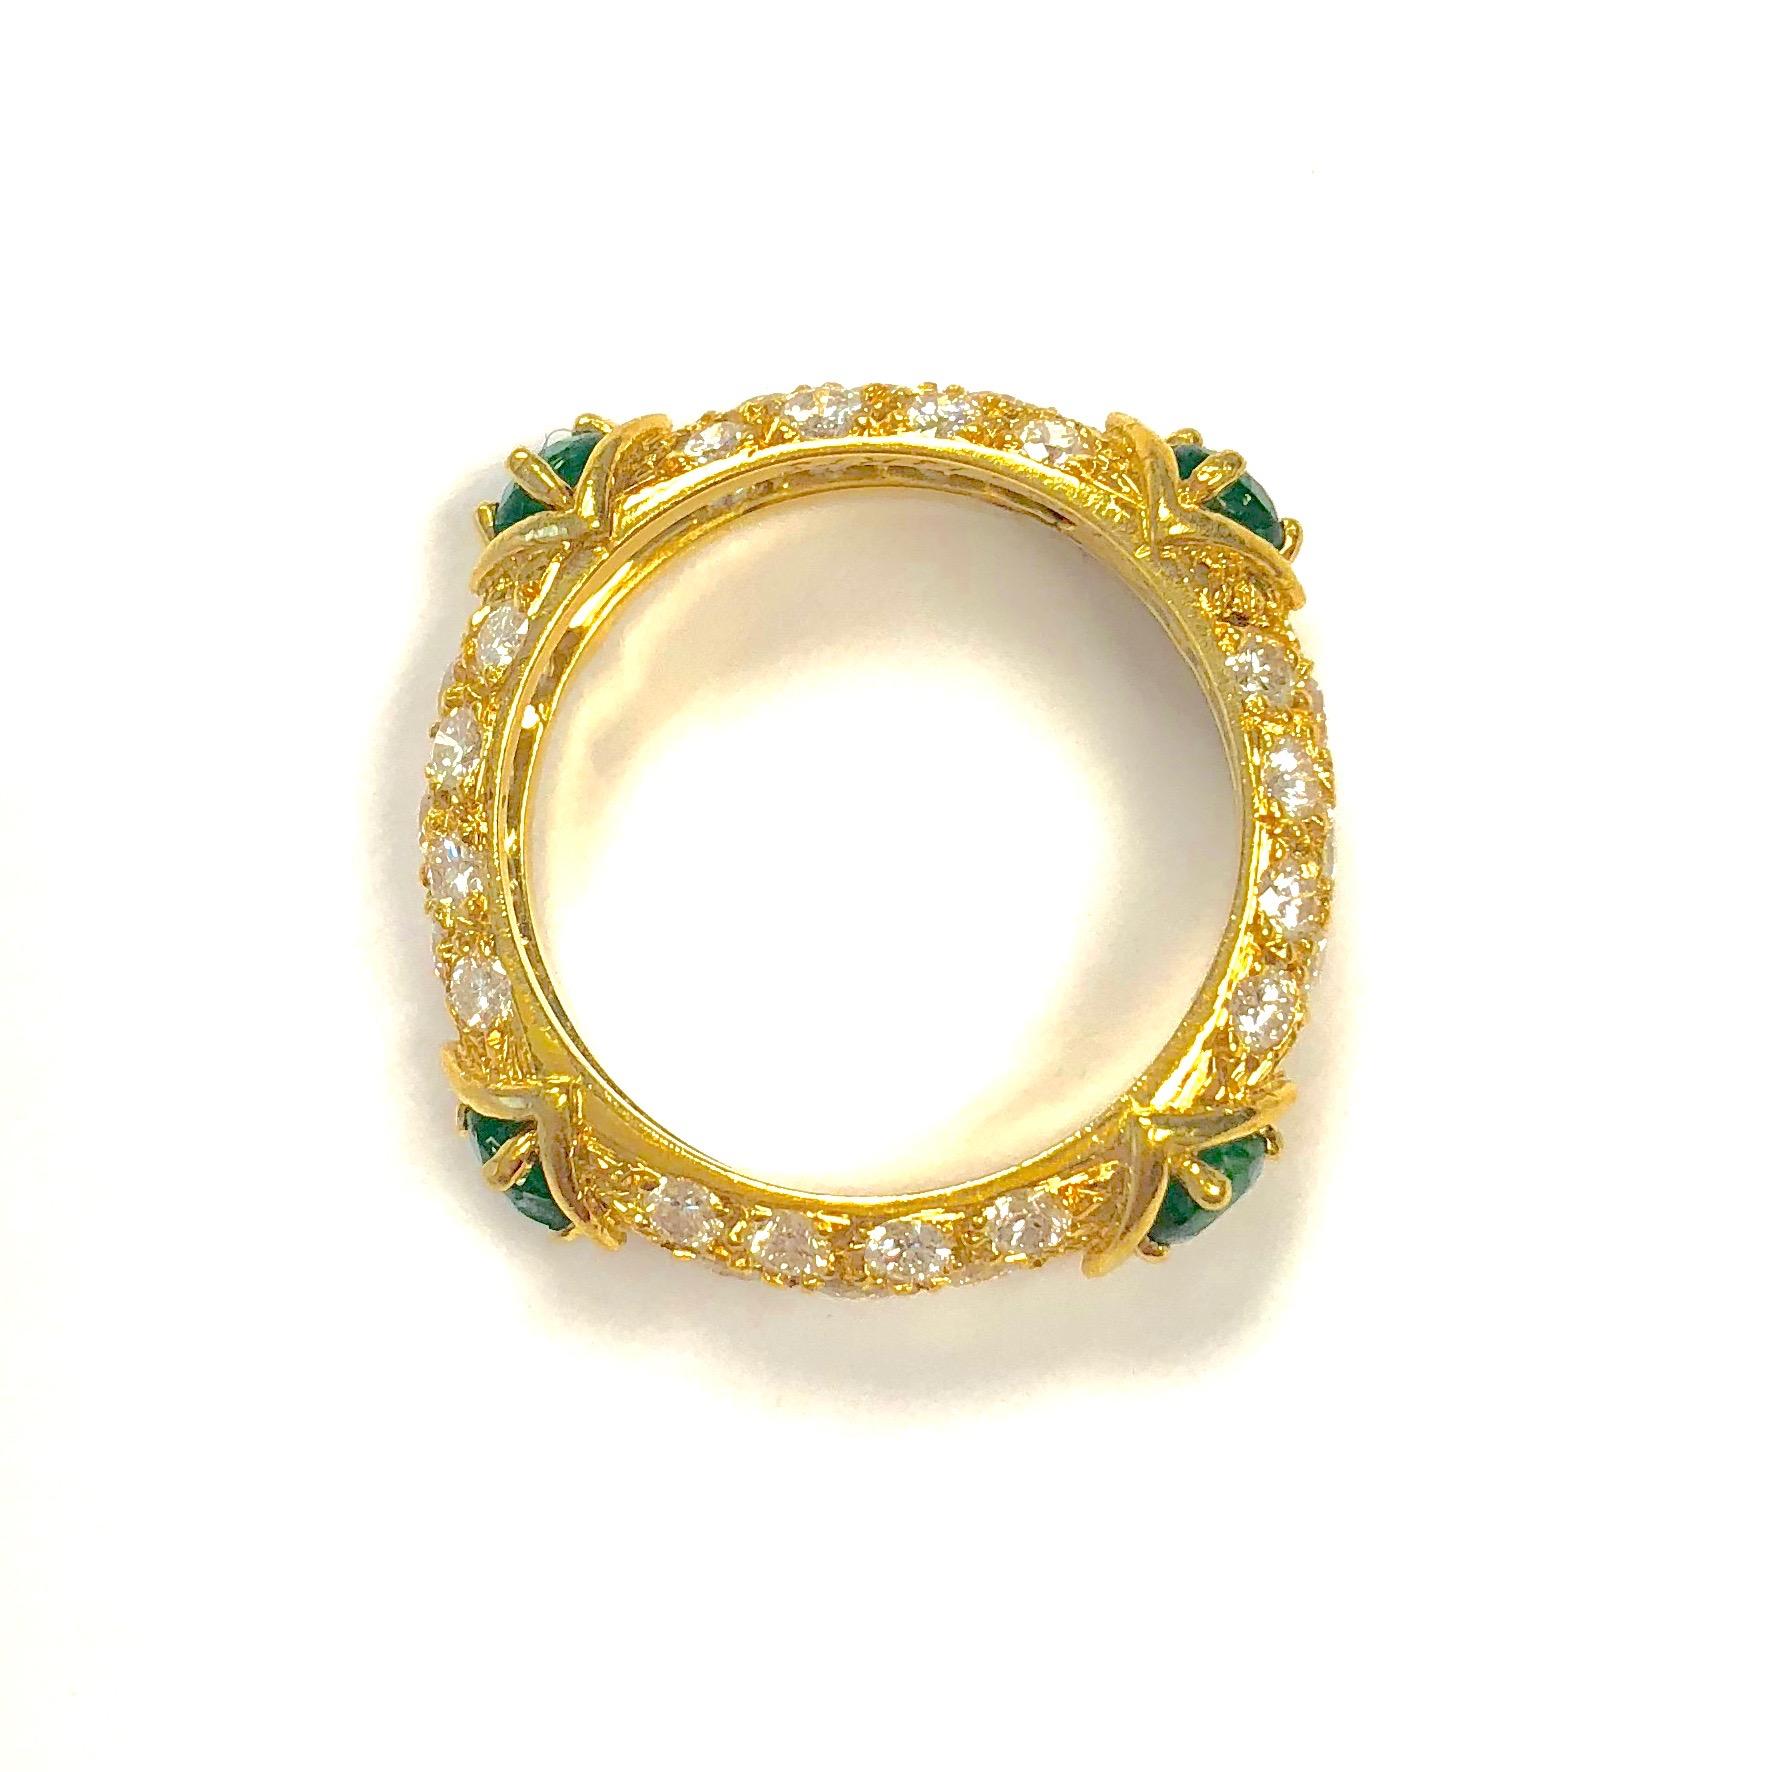 18K yellow gold pave' set diamond band with four emeralds.
Marked: MAUBOUSSIN PARIS and the serial number and the french 18K gold hallmark
Total diamond weight: 1.1 carats
Total emerald weight: 0.60 carats
Size: 6.25
Weight: 4.7 grams 